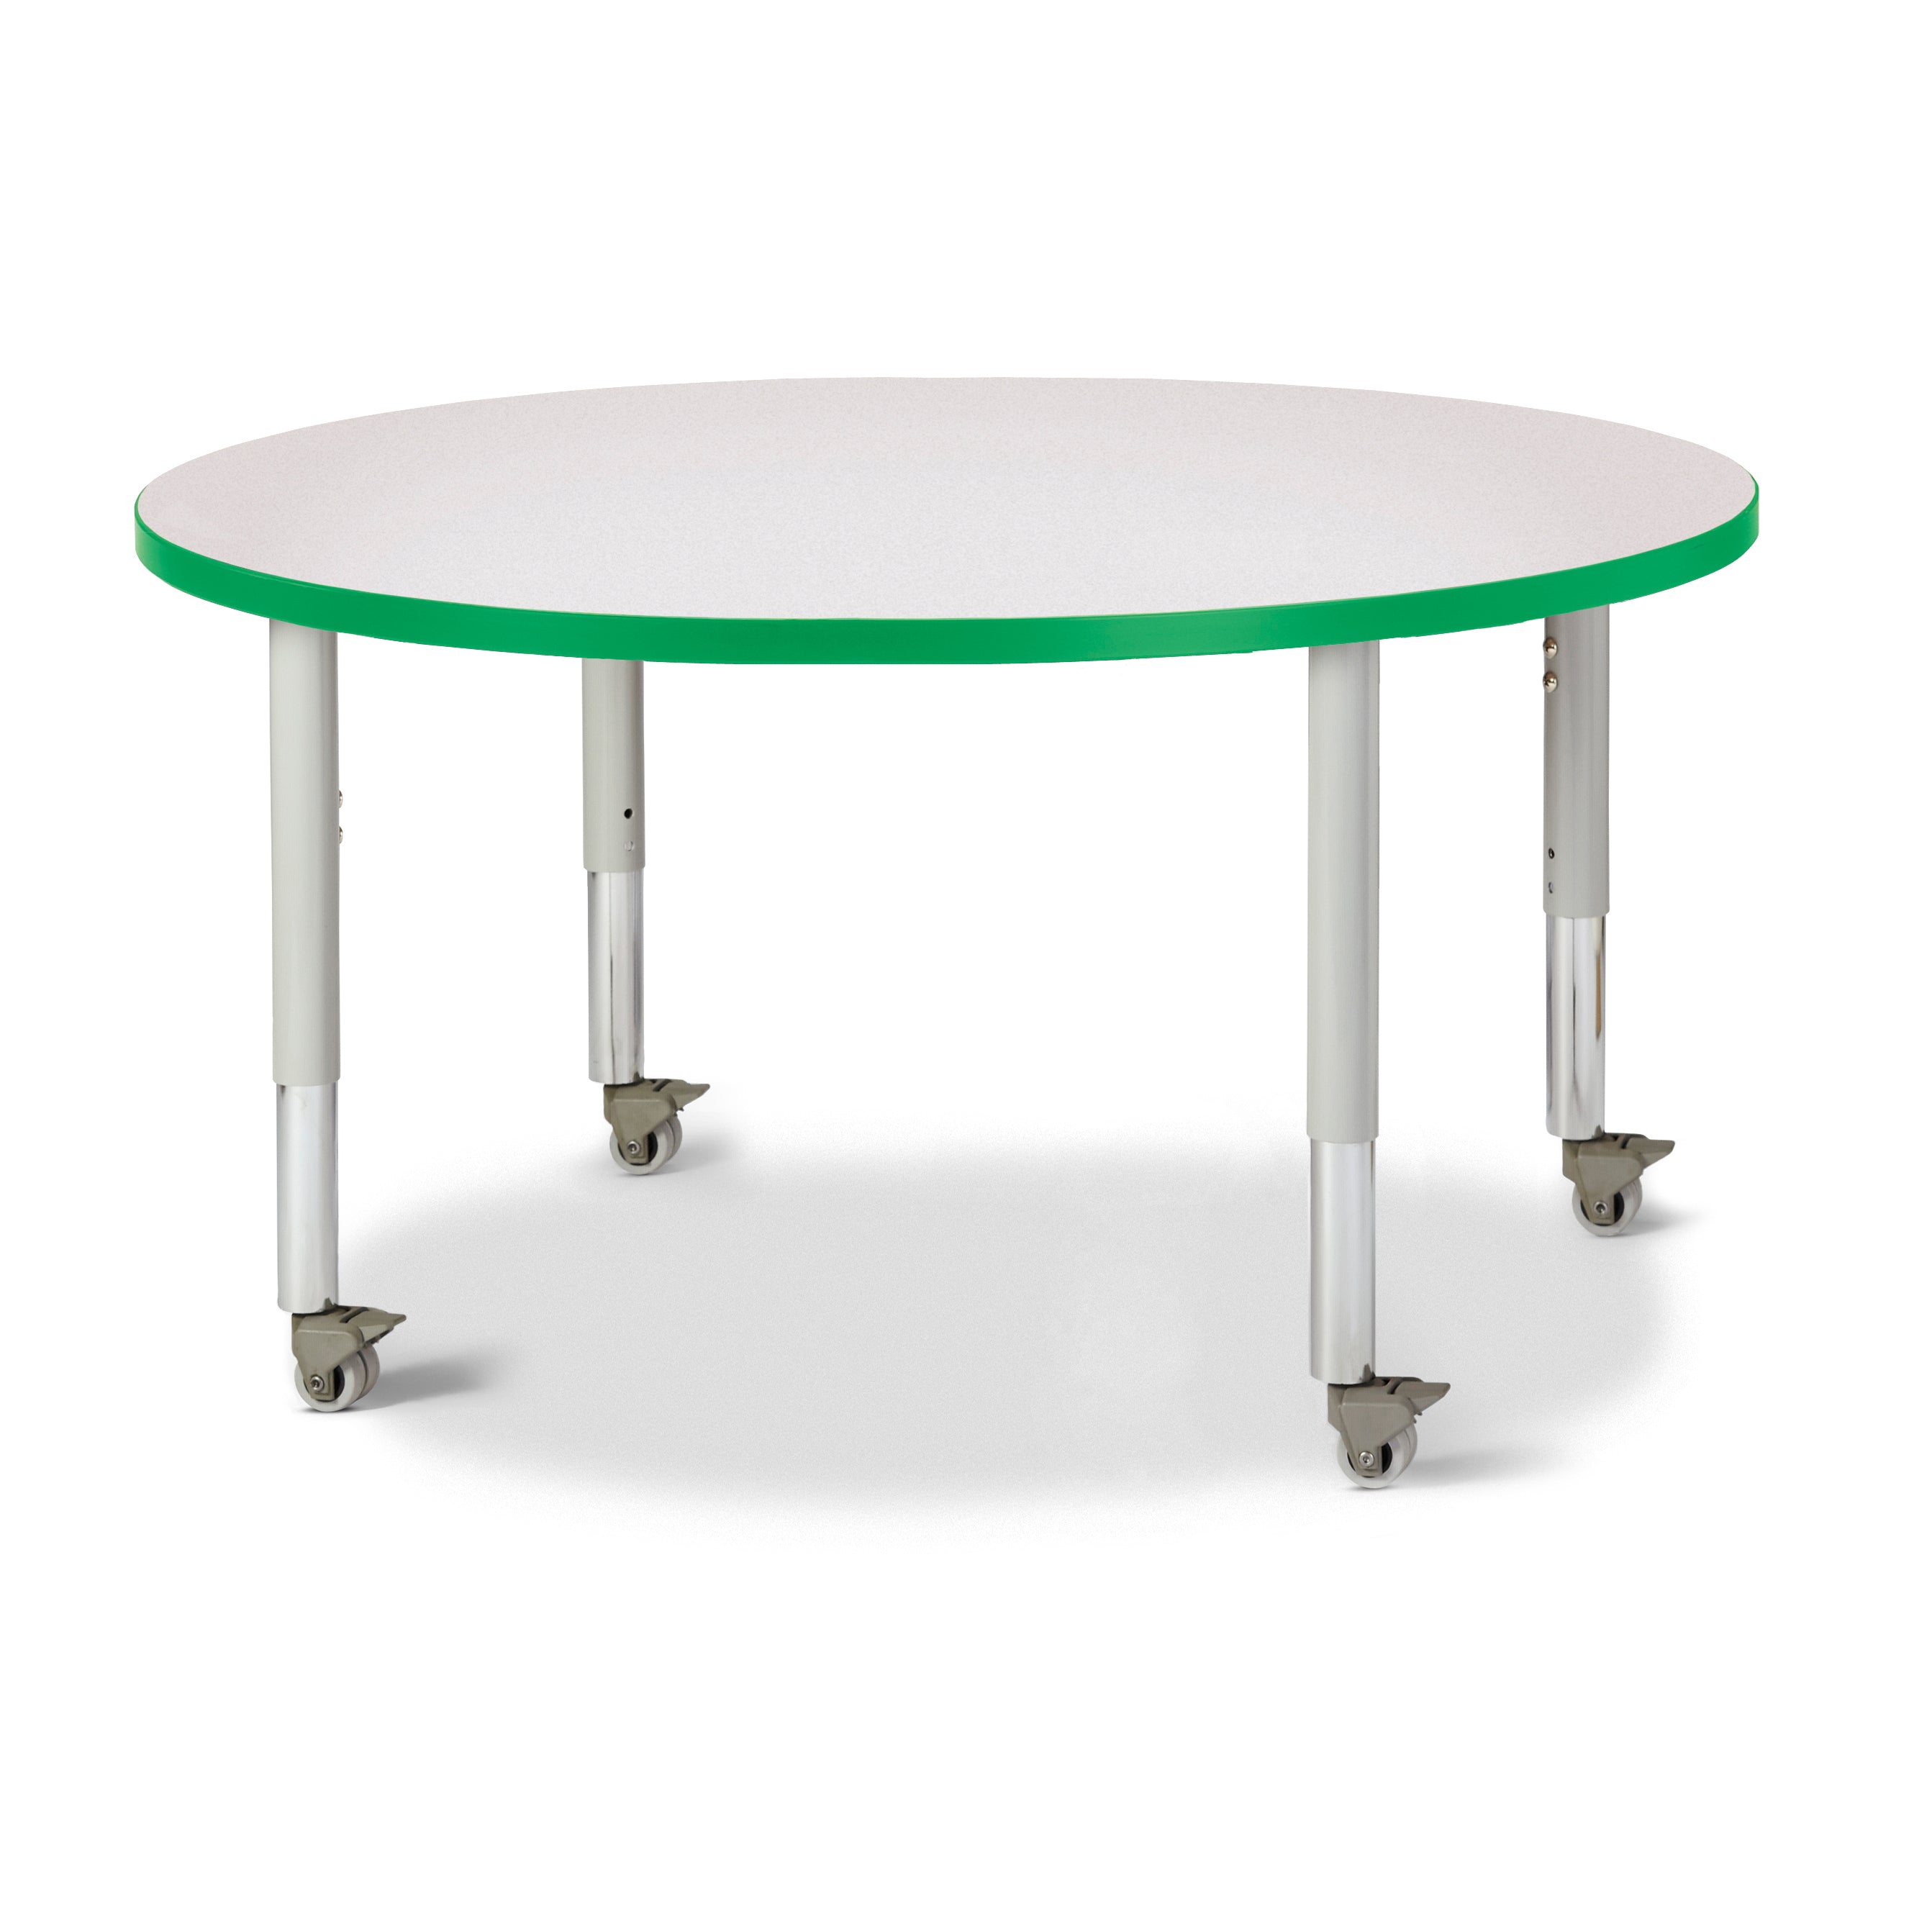 6468JCM119, Berries Round Activity Table - 42" Diameter, Mobile - Freckled Gray/Green/Gray